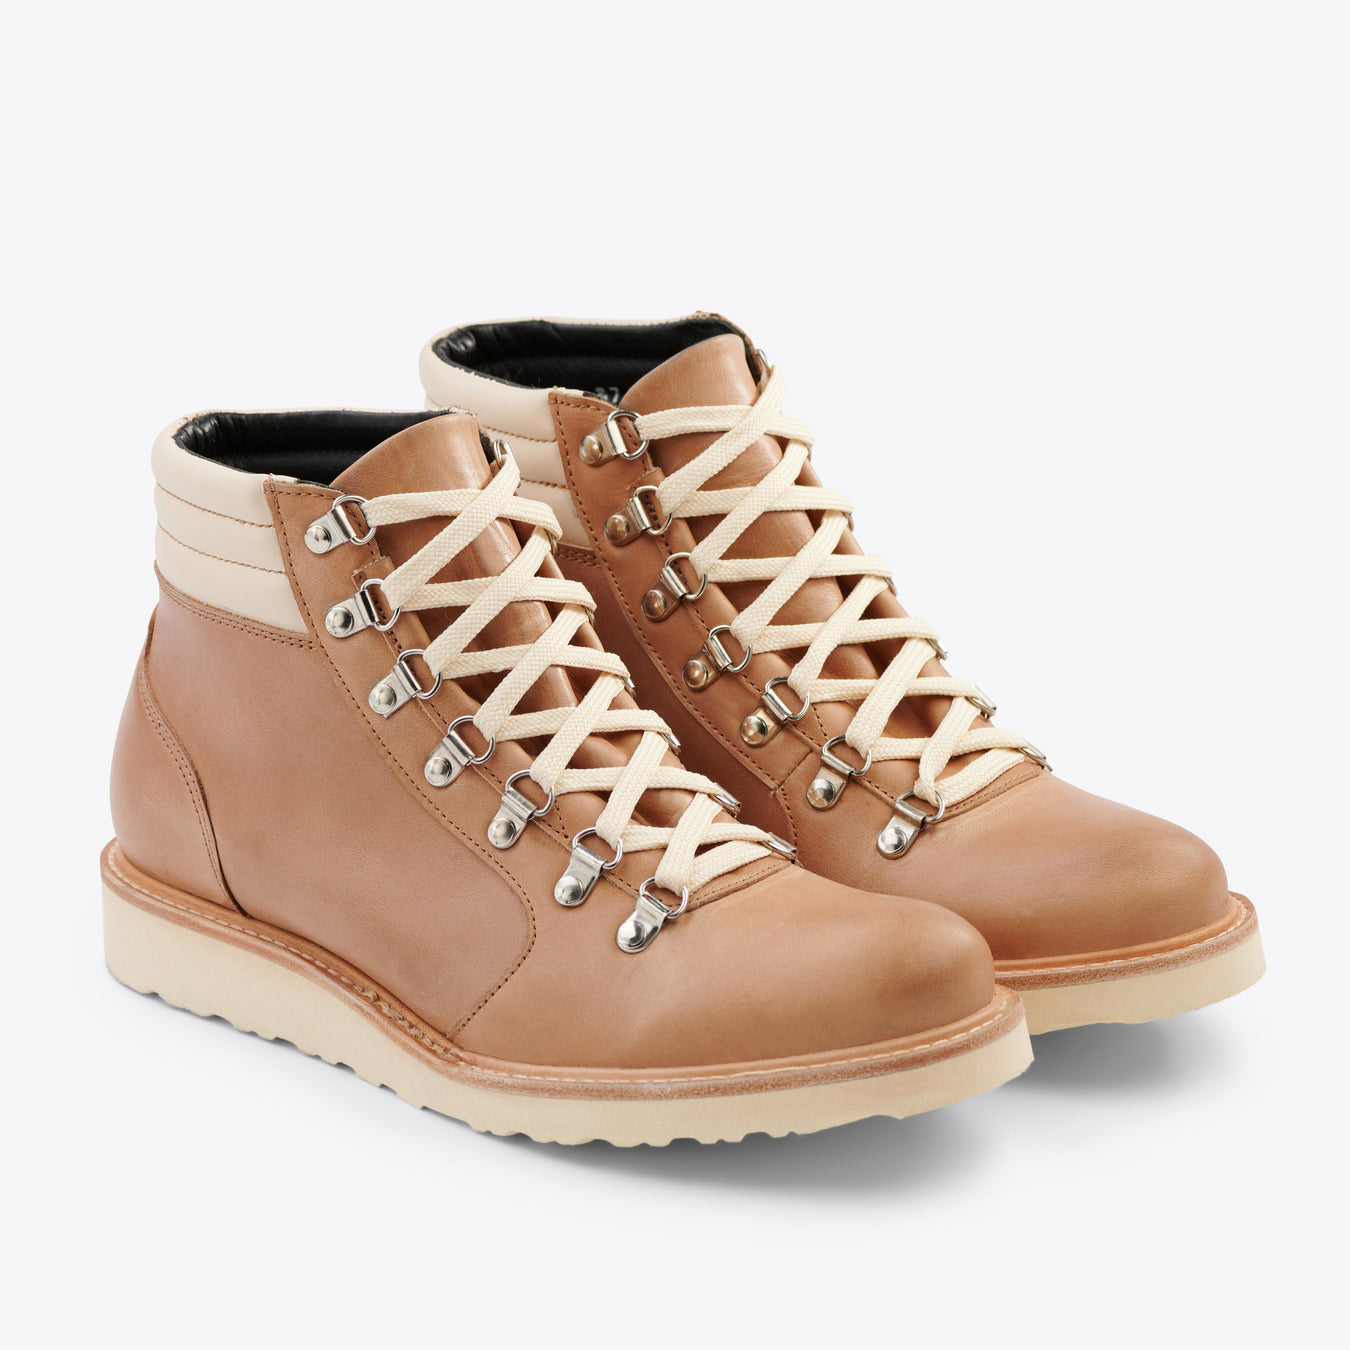 Go-To City Hiker Boot